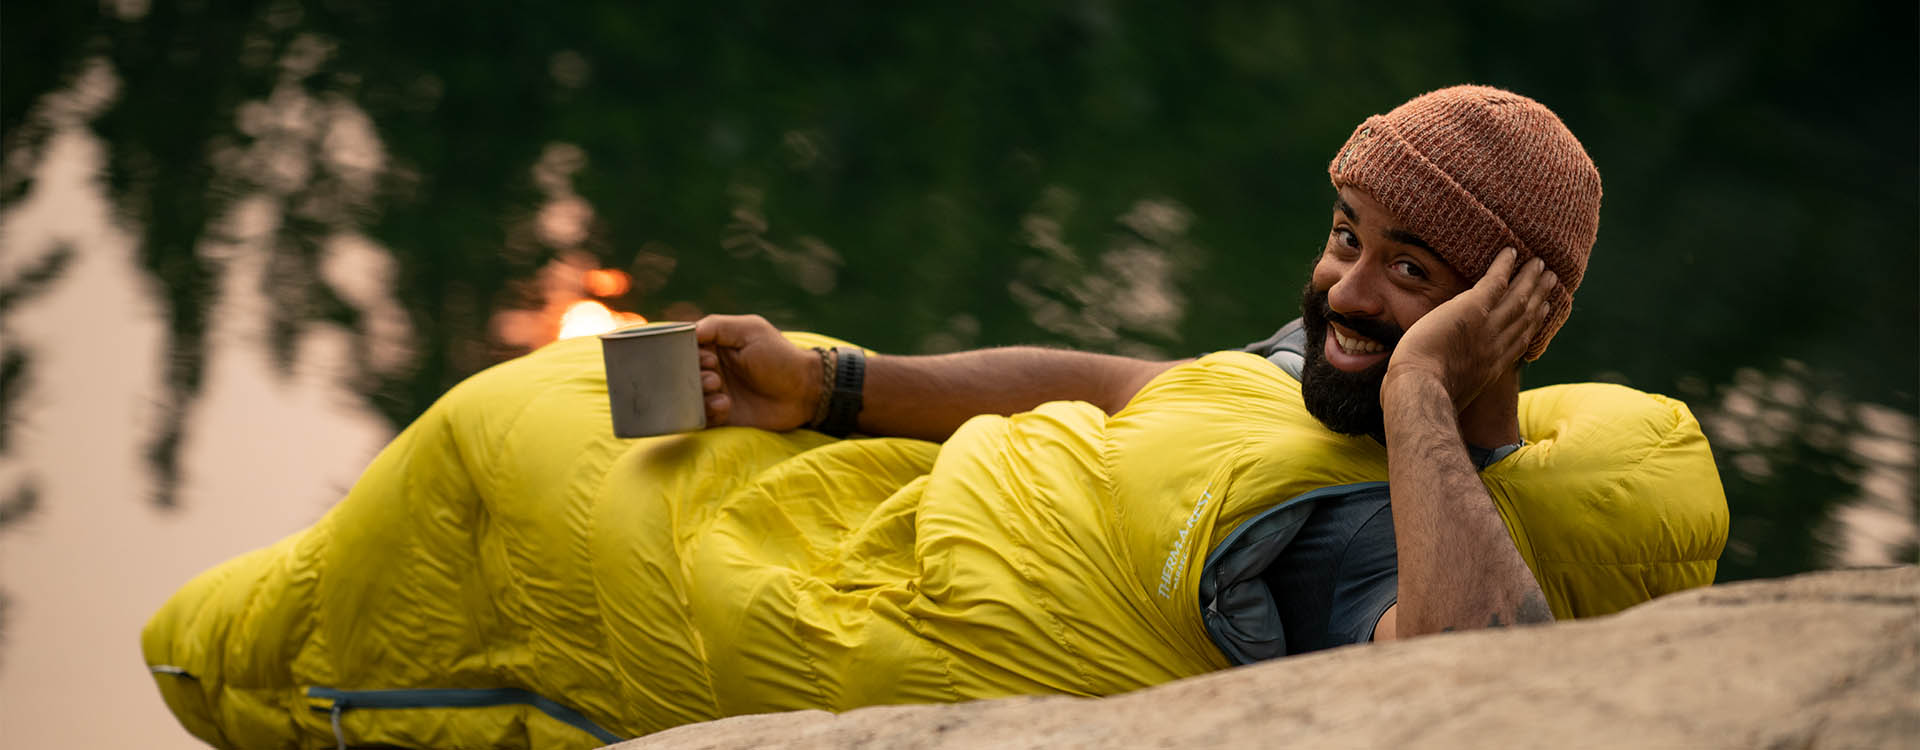 ﻿﻿﻿Well Rested & Recycled﻿ - The Parsec sleeping bag line is 100% ﻿Global Recycle Standard certified.﻿﻿